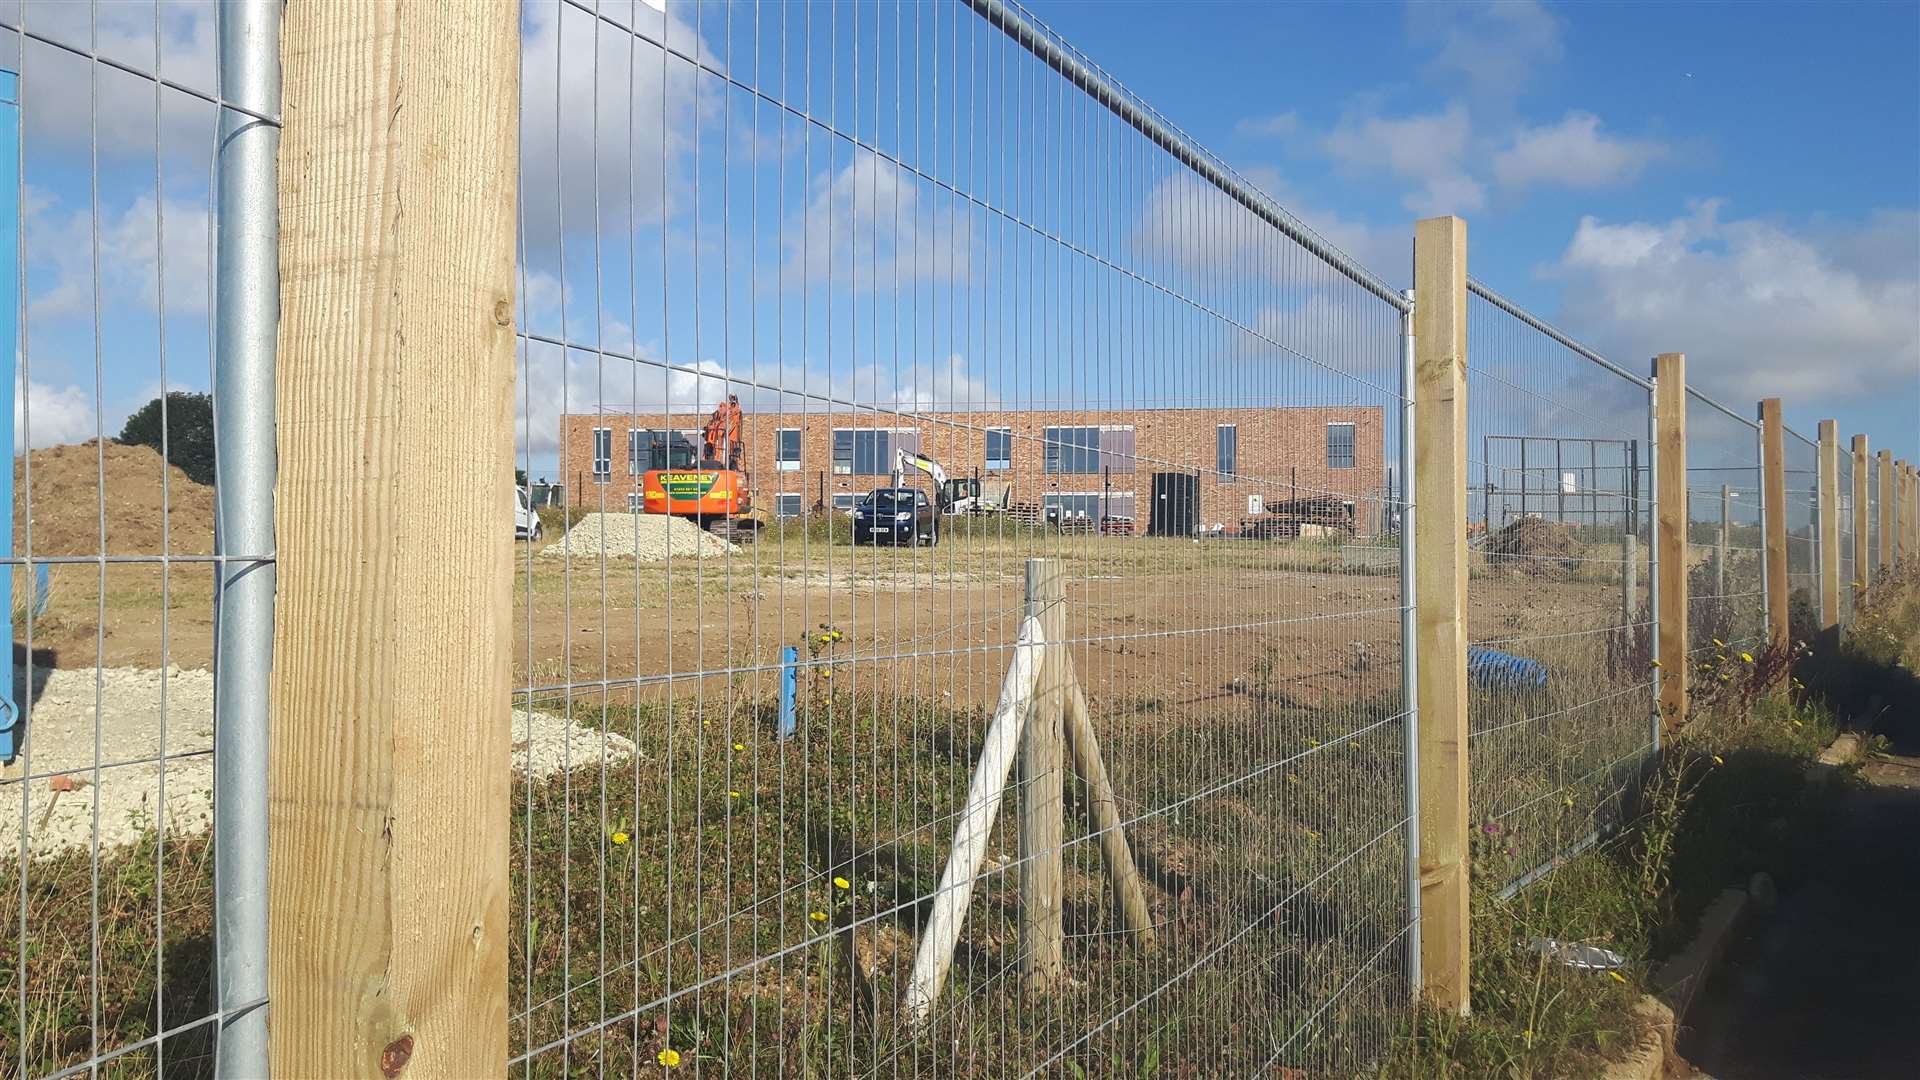 The new Whitfield and Aspen Primary School is being built off Richmond Way